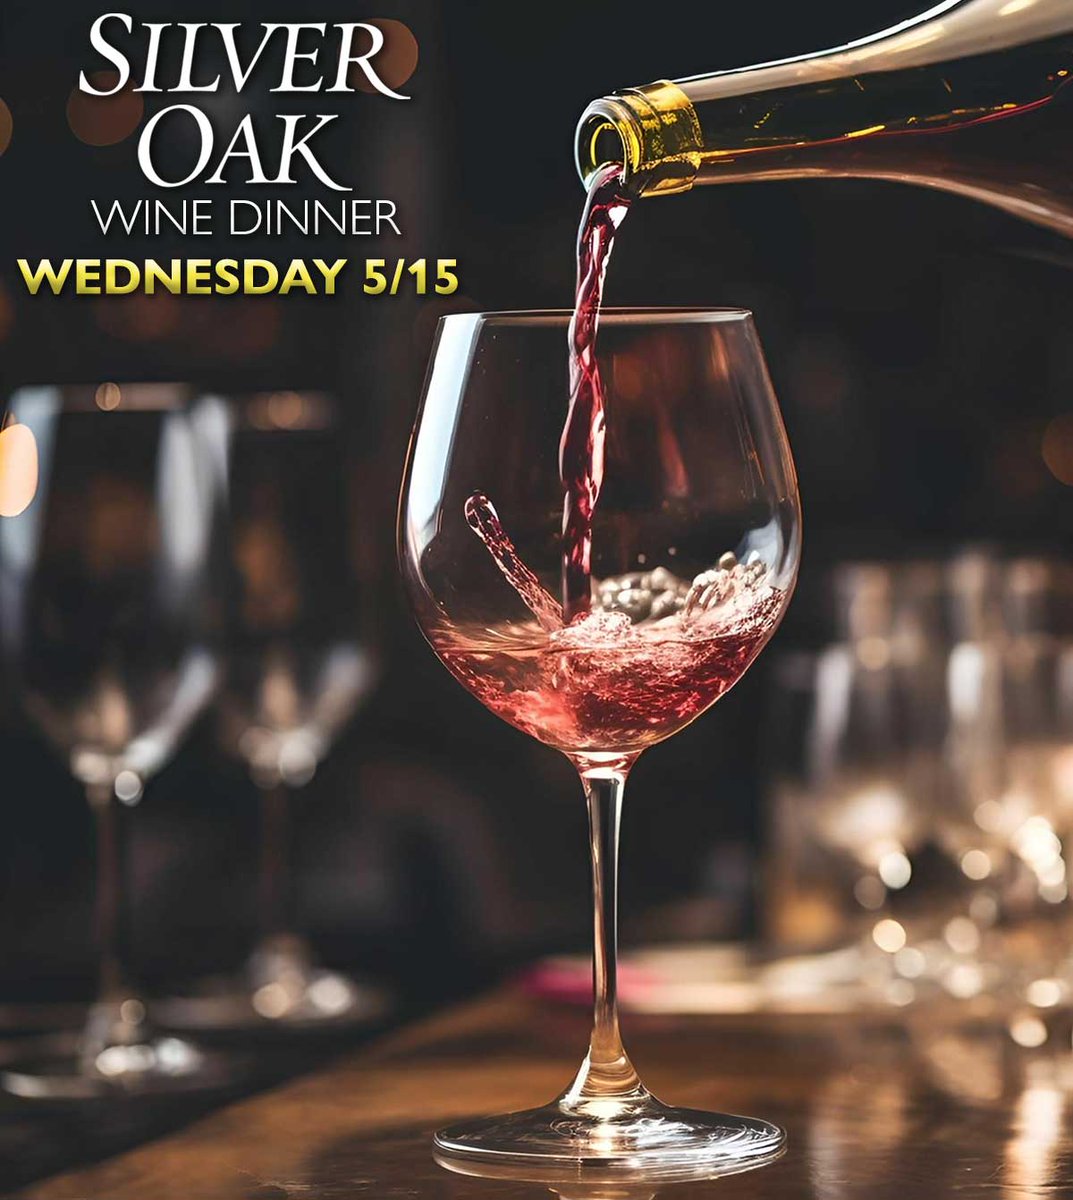 Silver Oak Dinner Wednesday. Hurry only a few seats left! Guest Speaker: Matt Katz, Northeast Reg. Sales Manager, Silver Oak Cellars. We can’t wait to see you there!

watersedgeatgiovannis.com/silver-oaks-wi…

#LifeIsACabernet #californiawines #napavalley #winedinner #winetasting #winetastingfun